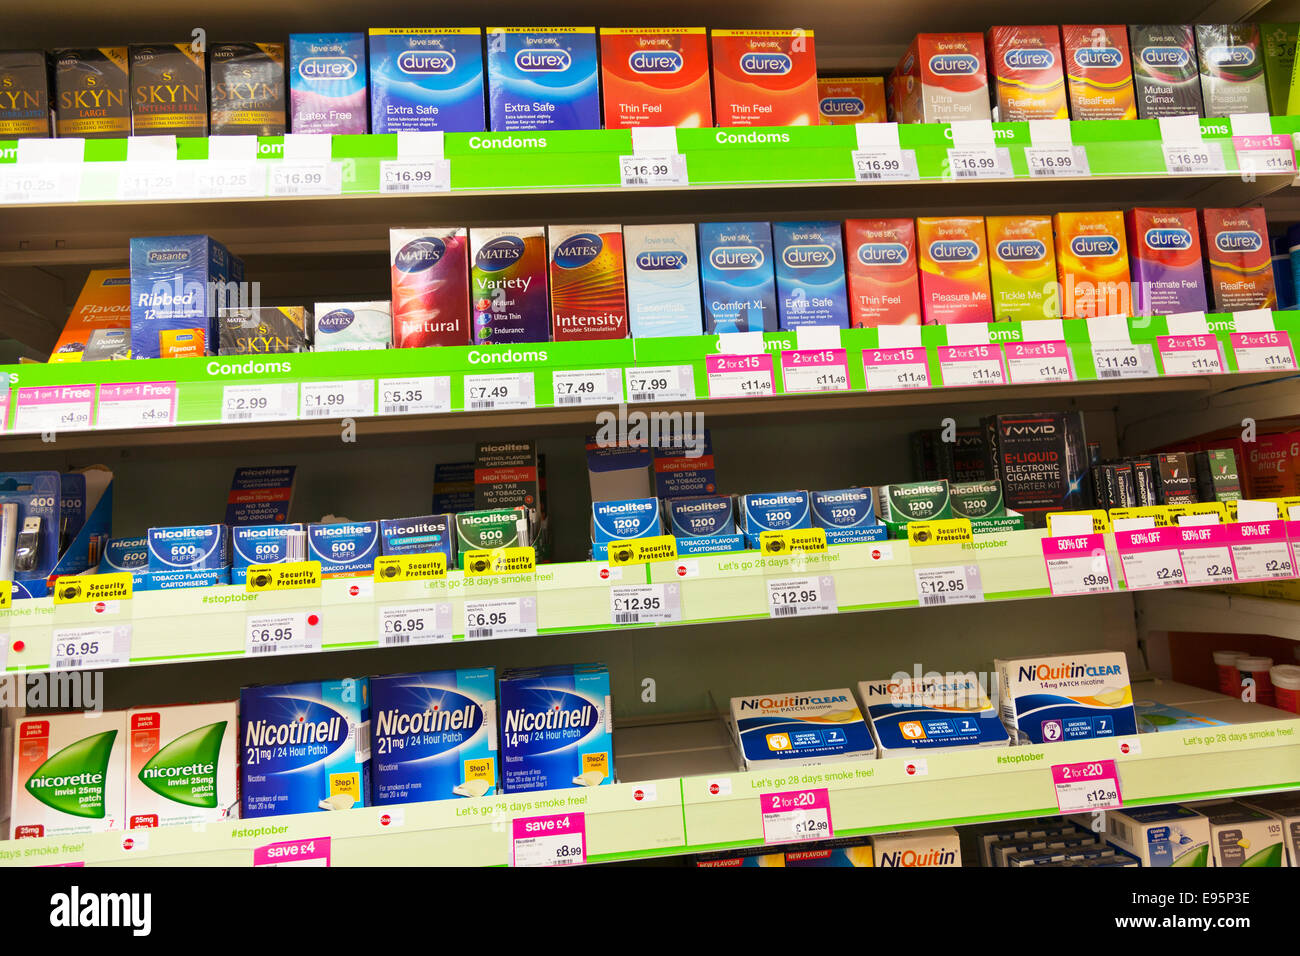 durex condoms nicotinell tobacco replacement product products on shelf at chemist Chemists shop store inside display Stock Photo